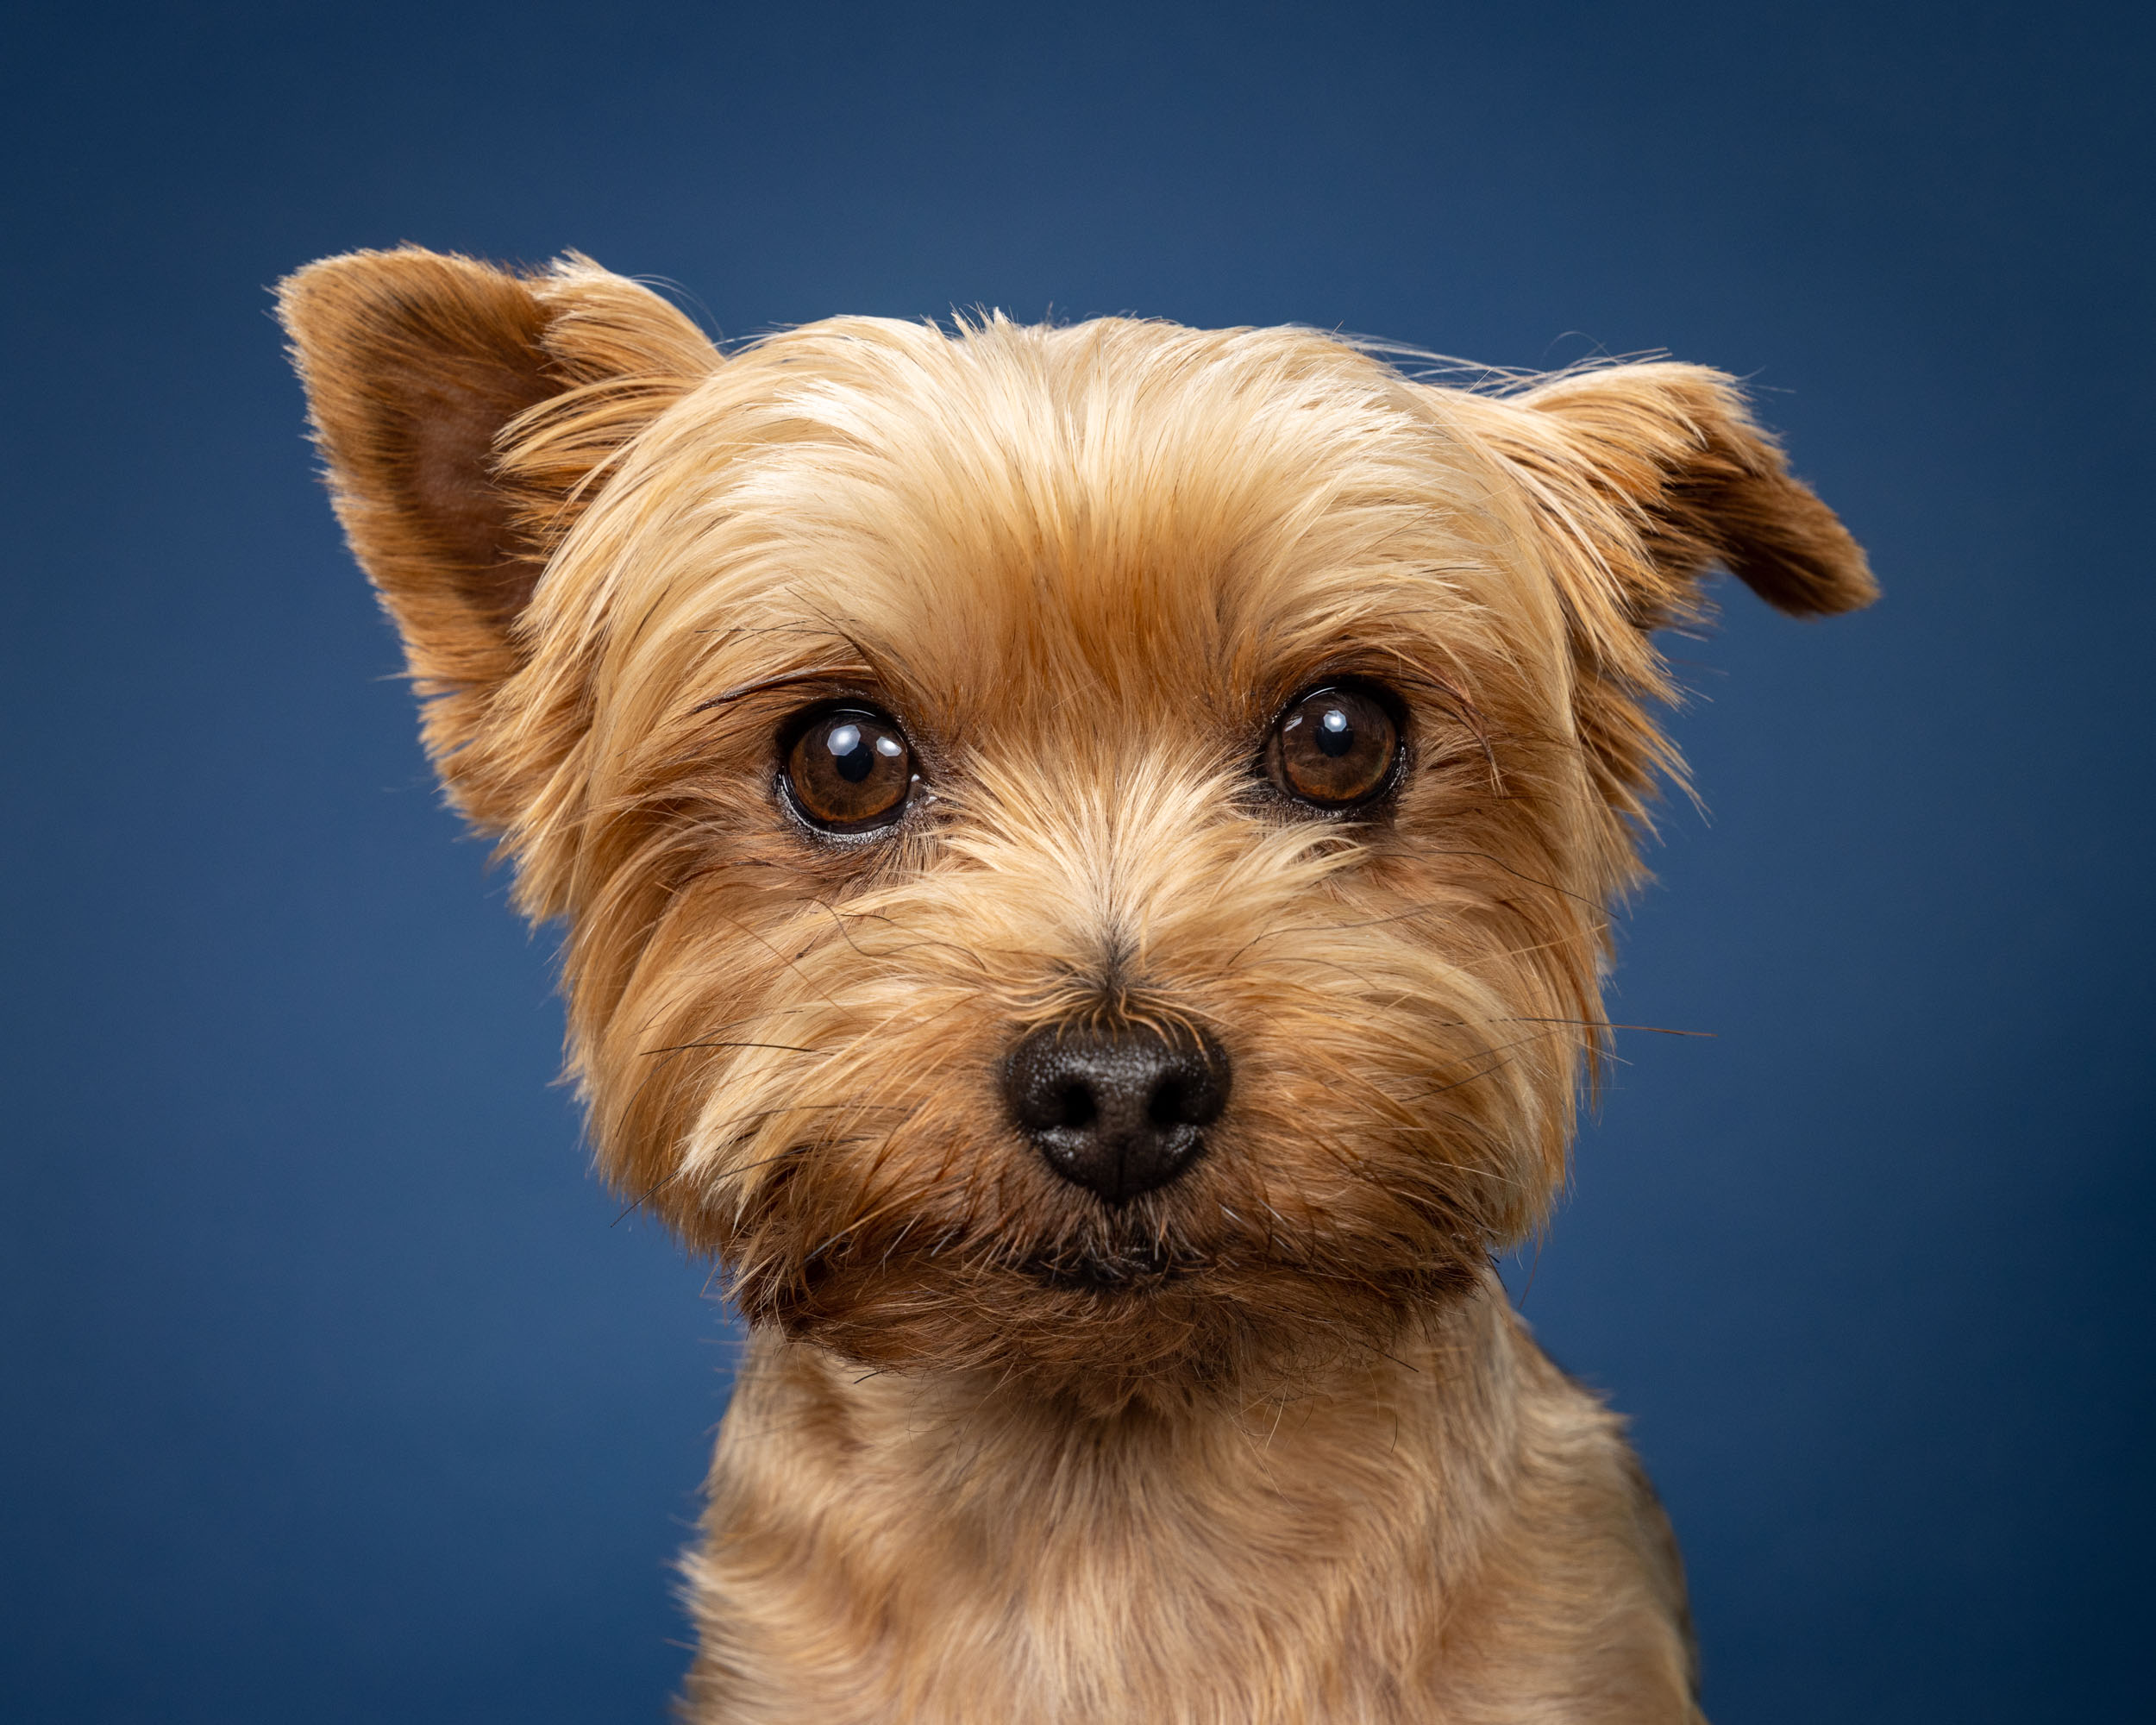 Dog Studio Photography | Yorkie on Blue Background by Mark Rogers